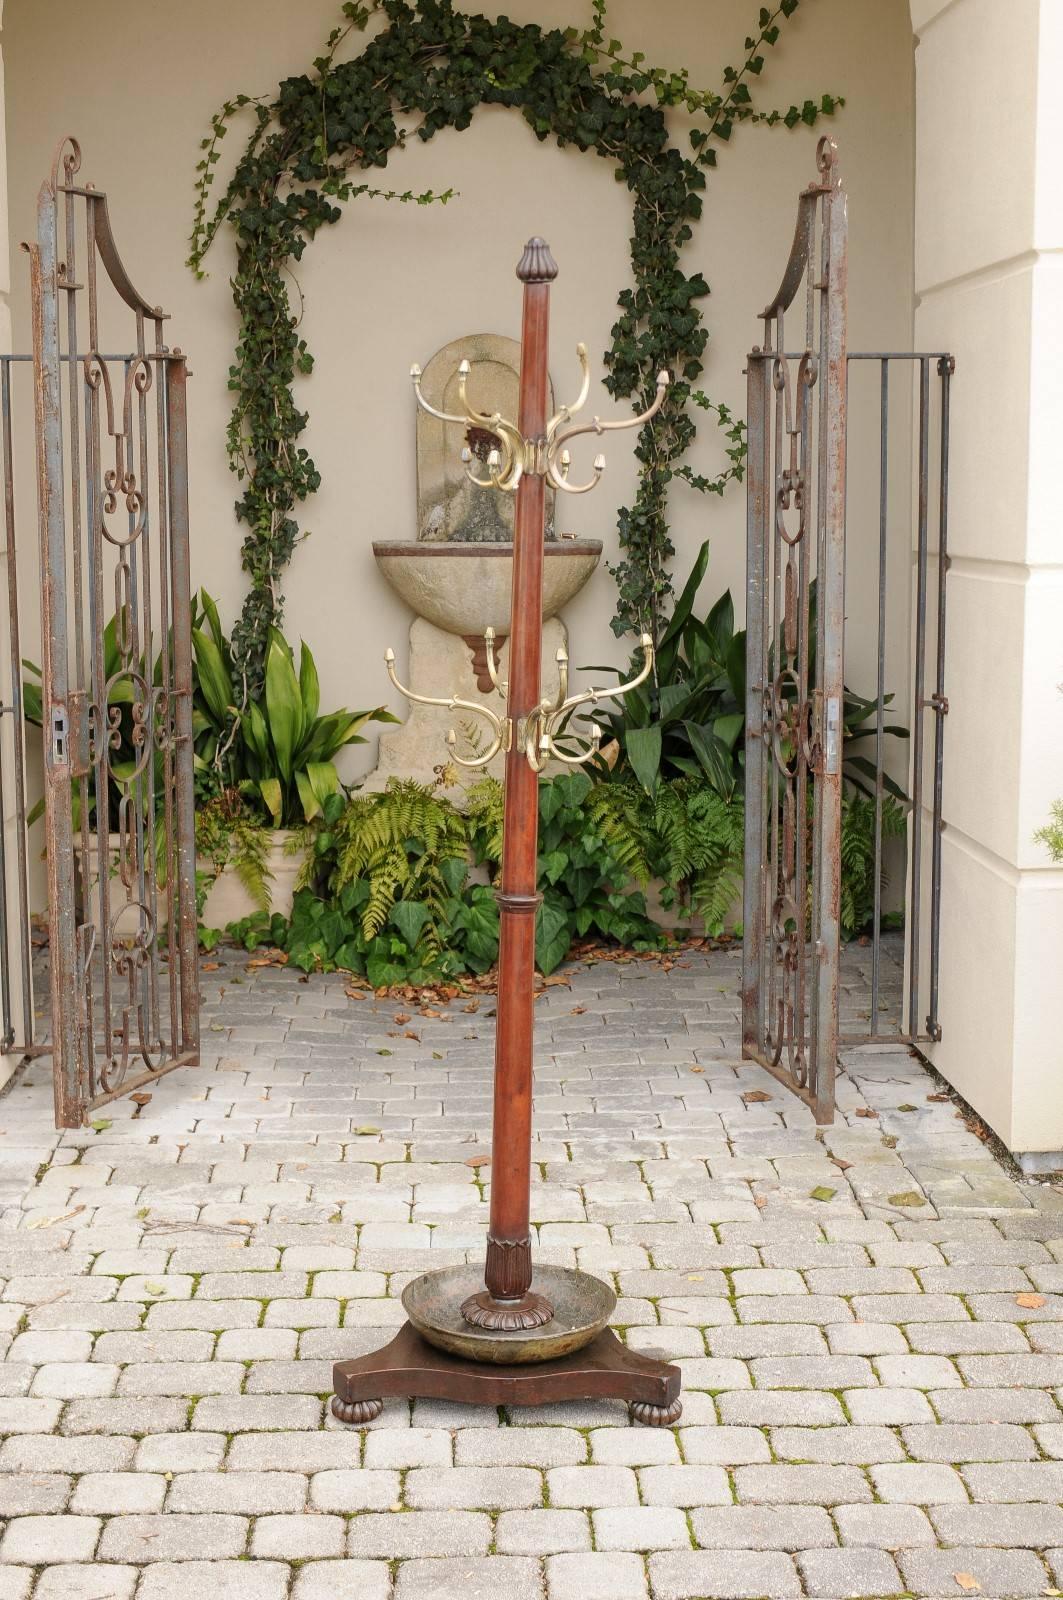 An English period Regency tall mahogany coat rack with bronze hooks from the early 19th century. This English coat rack features a central cylindrical mahogany column adorned in its extremities with gadroons and palmette motifs, typical of the taste